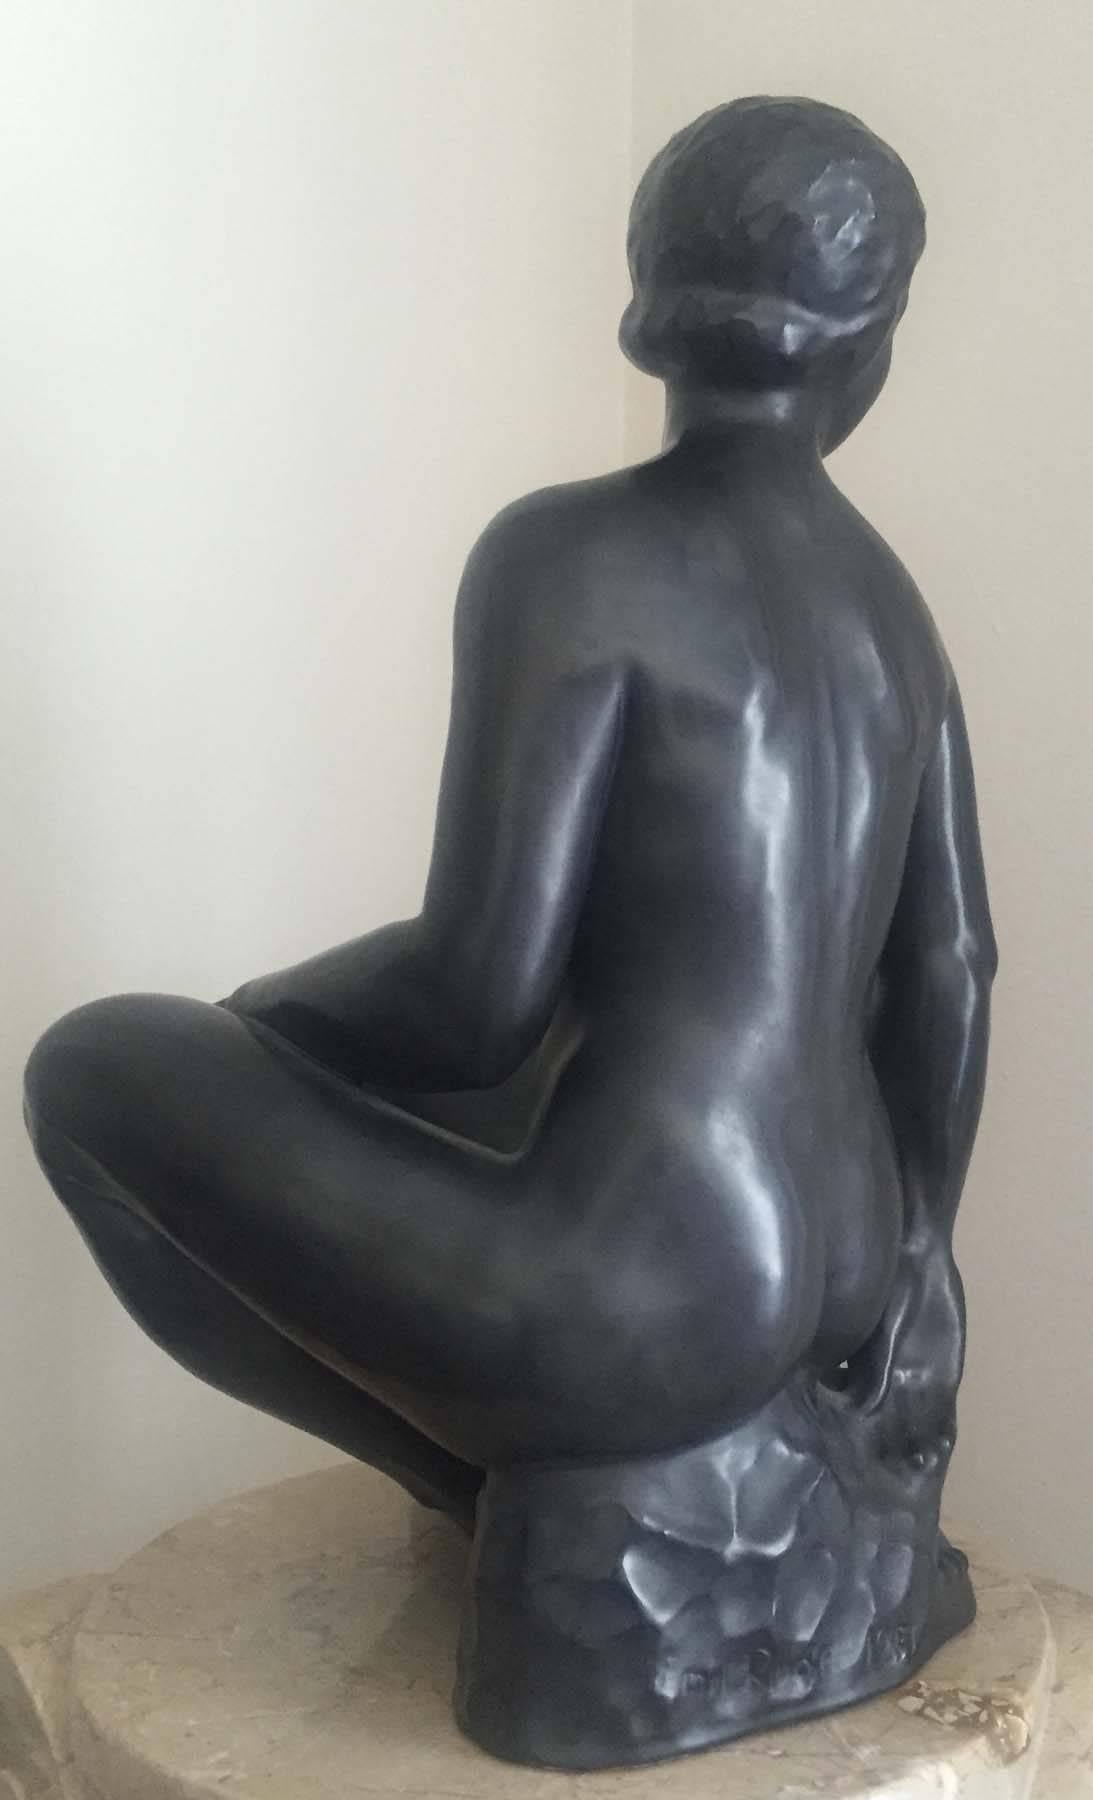 Seated Nude - Sculpture by Emil Ruge